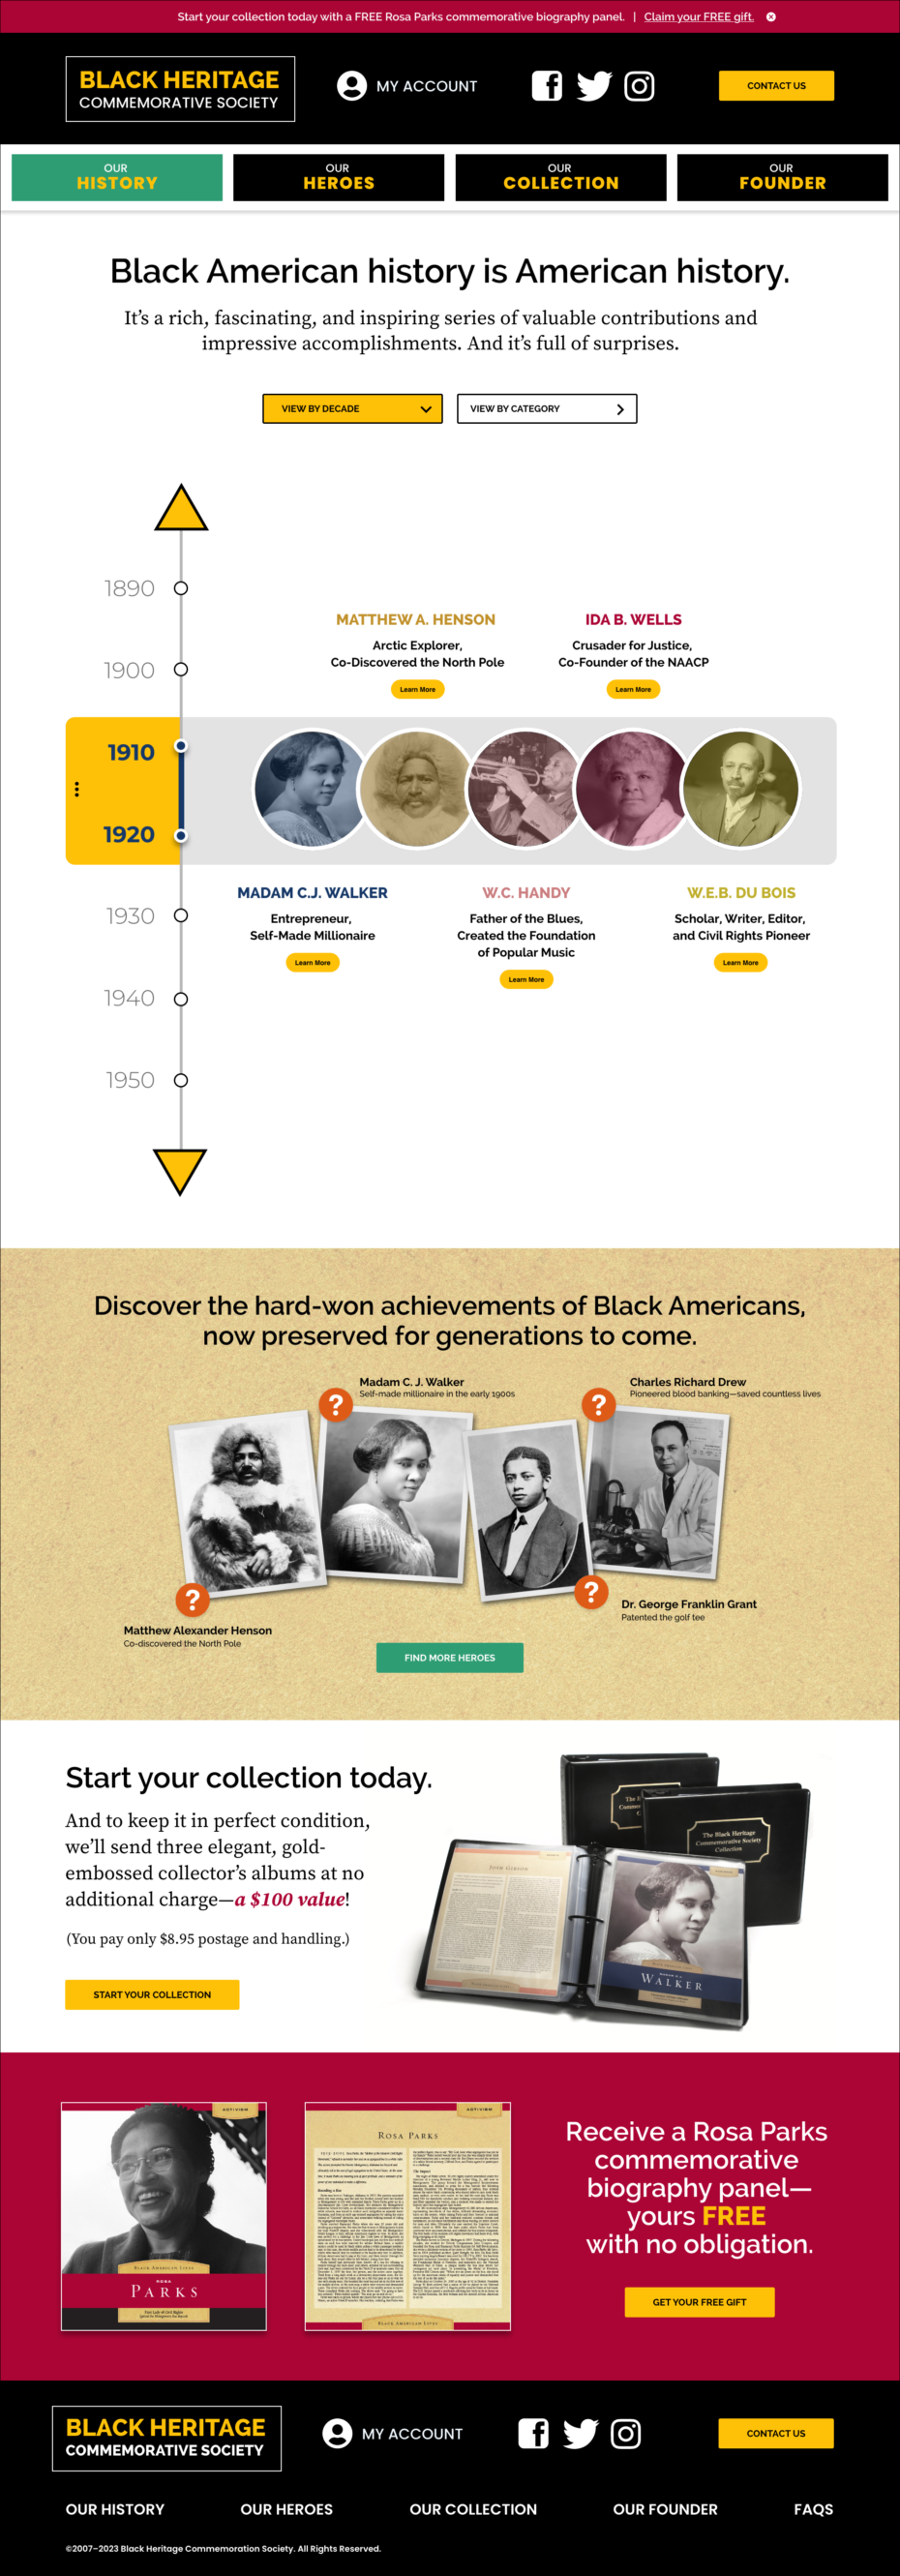 Black Heritage Commemorative Society Our History Page